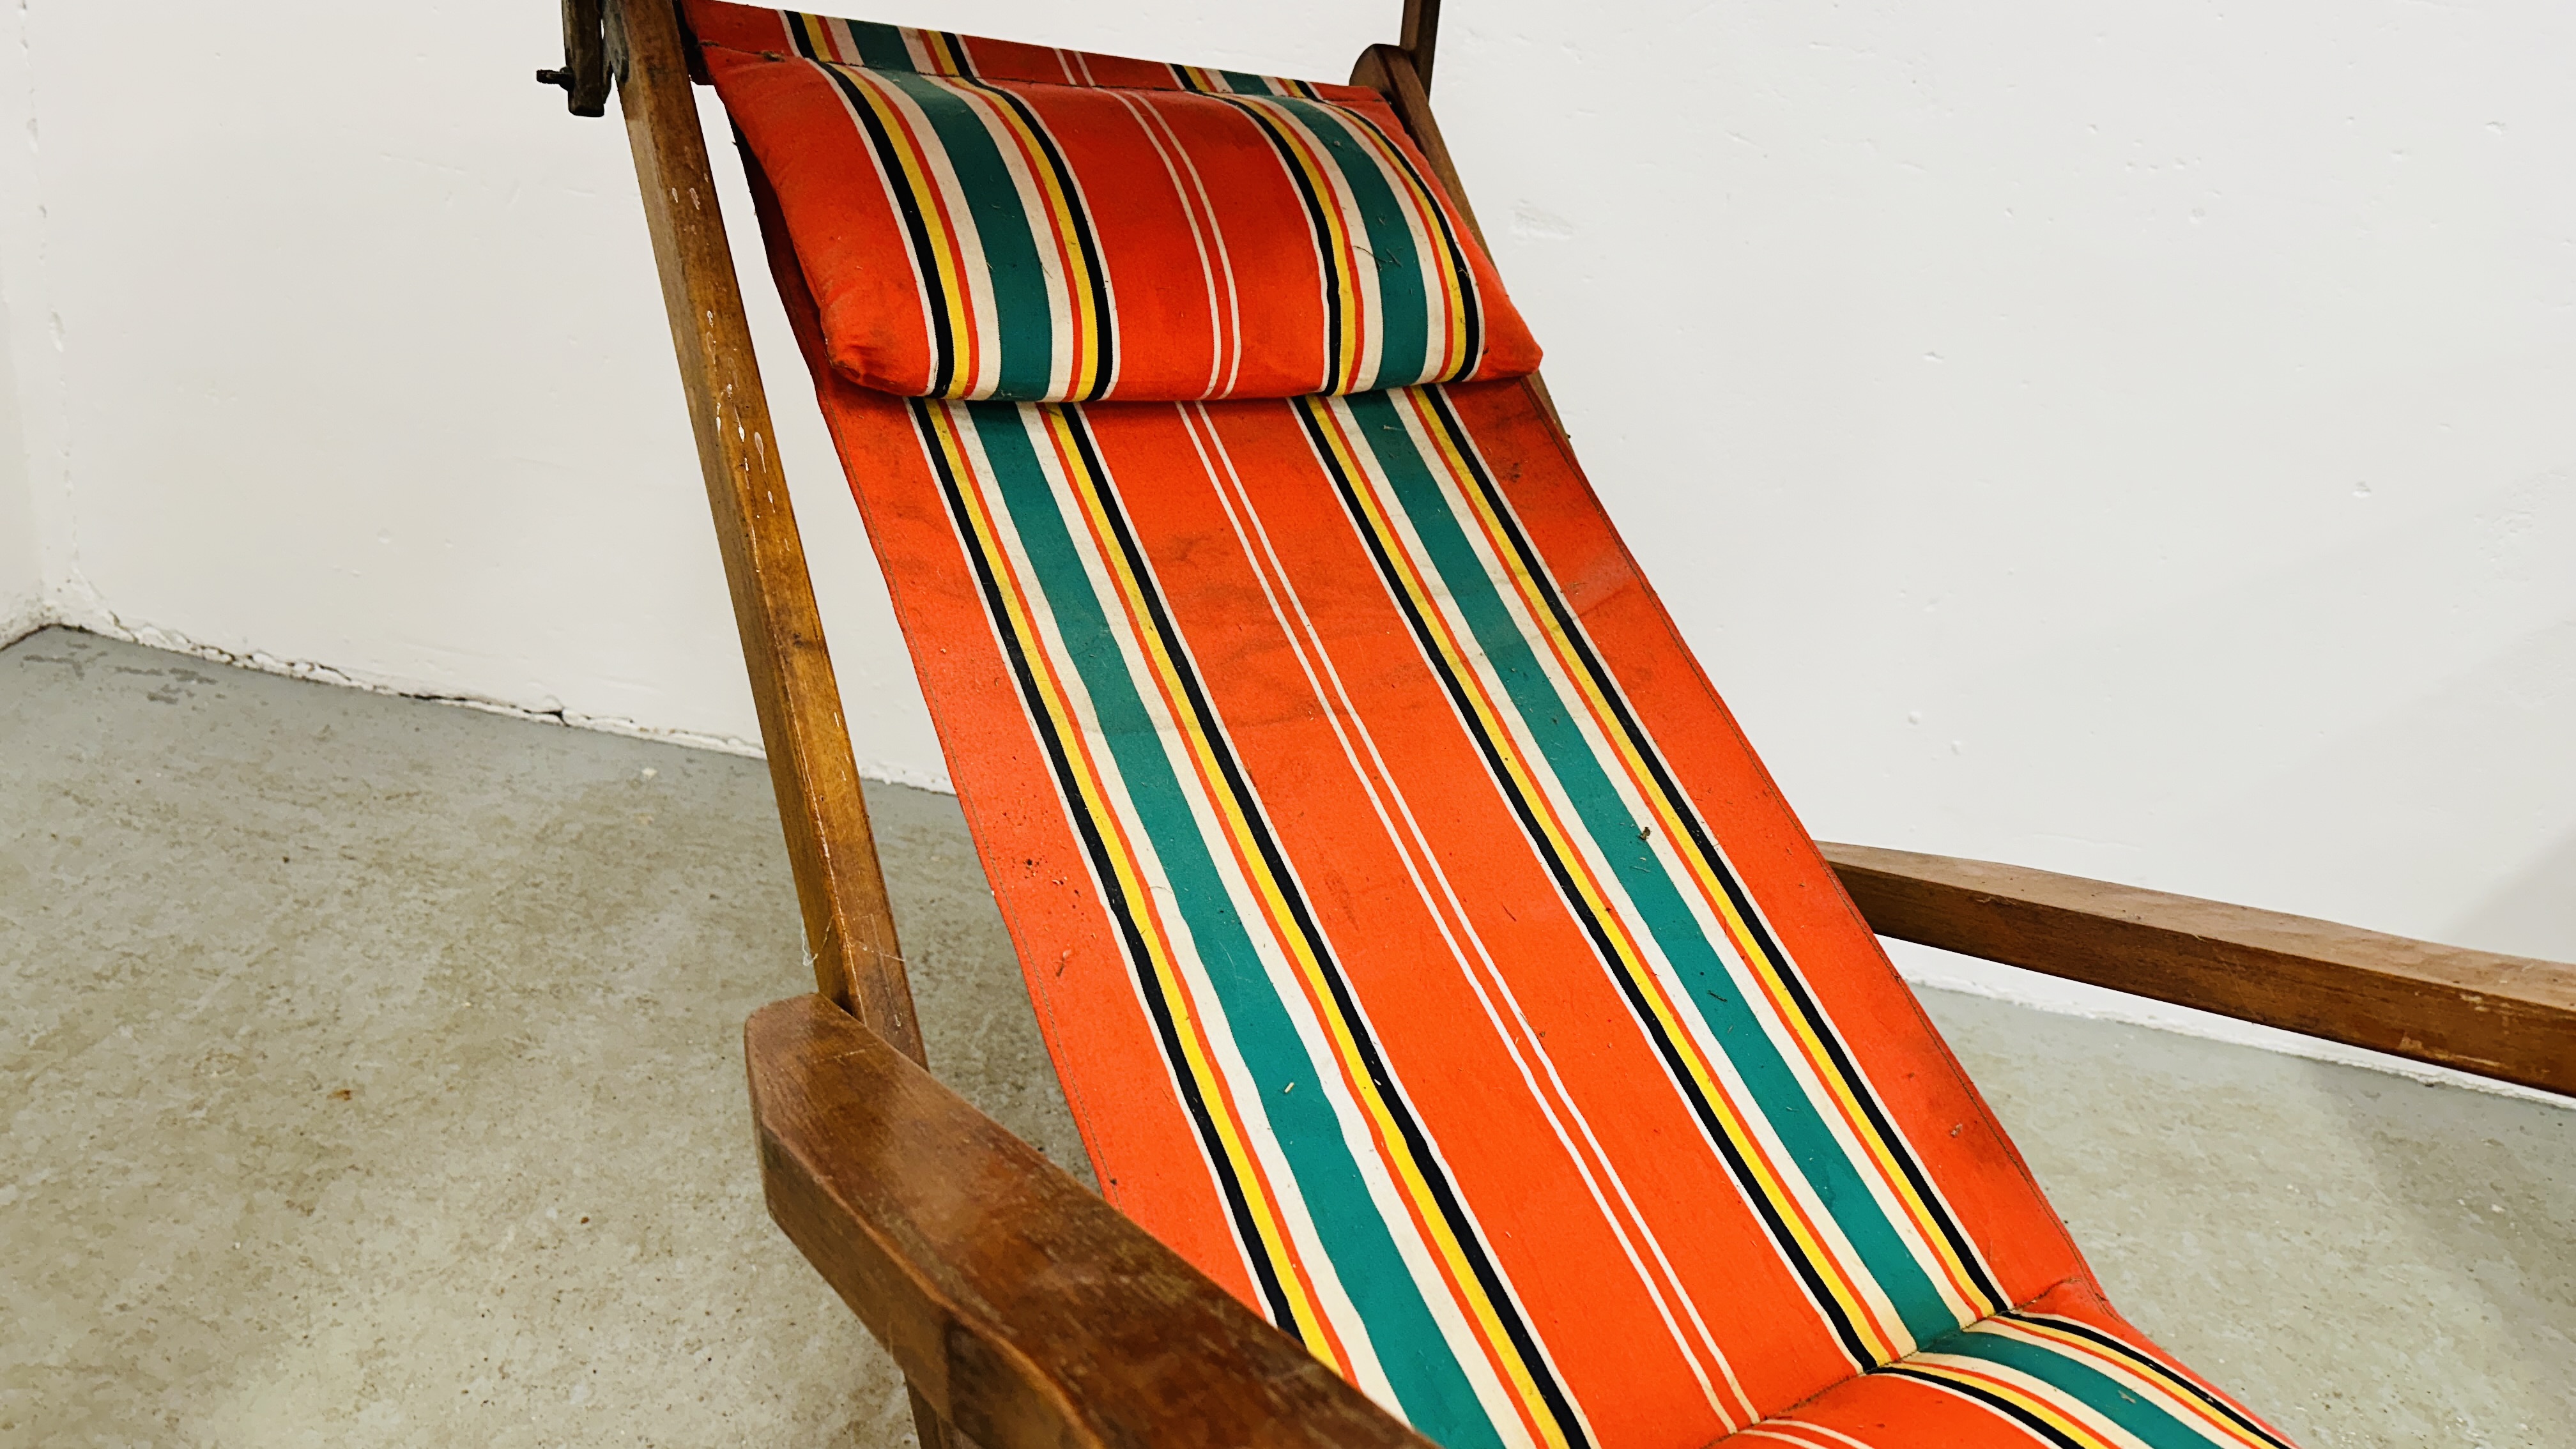 A PAIR OF GEEBRO "THE OCEAN CHAIR" DECK CHAIRS WITH SUN SHADES. - Image 11 of 13